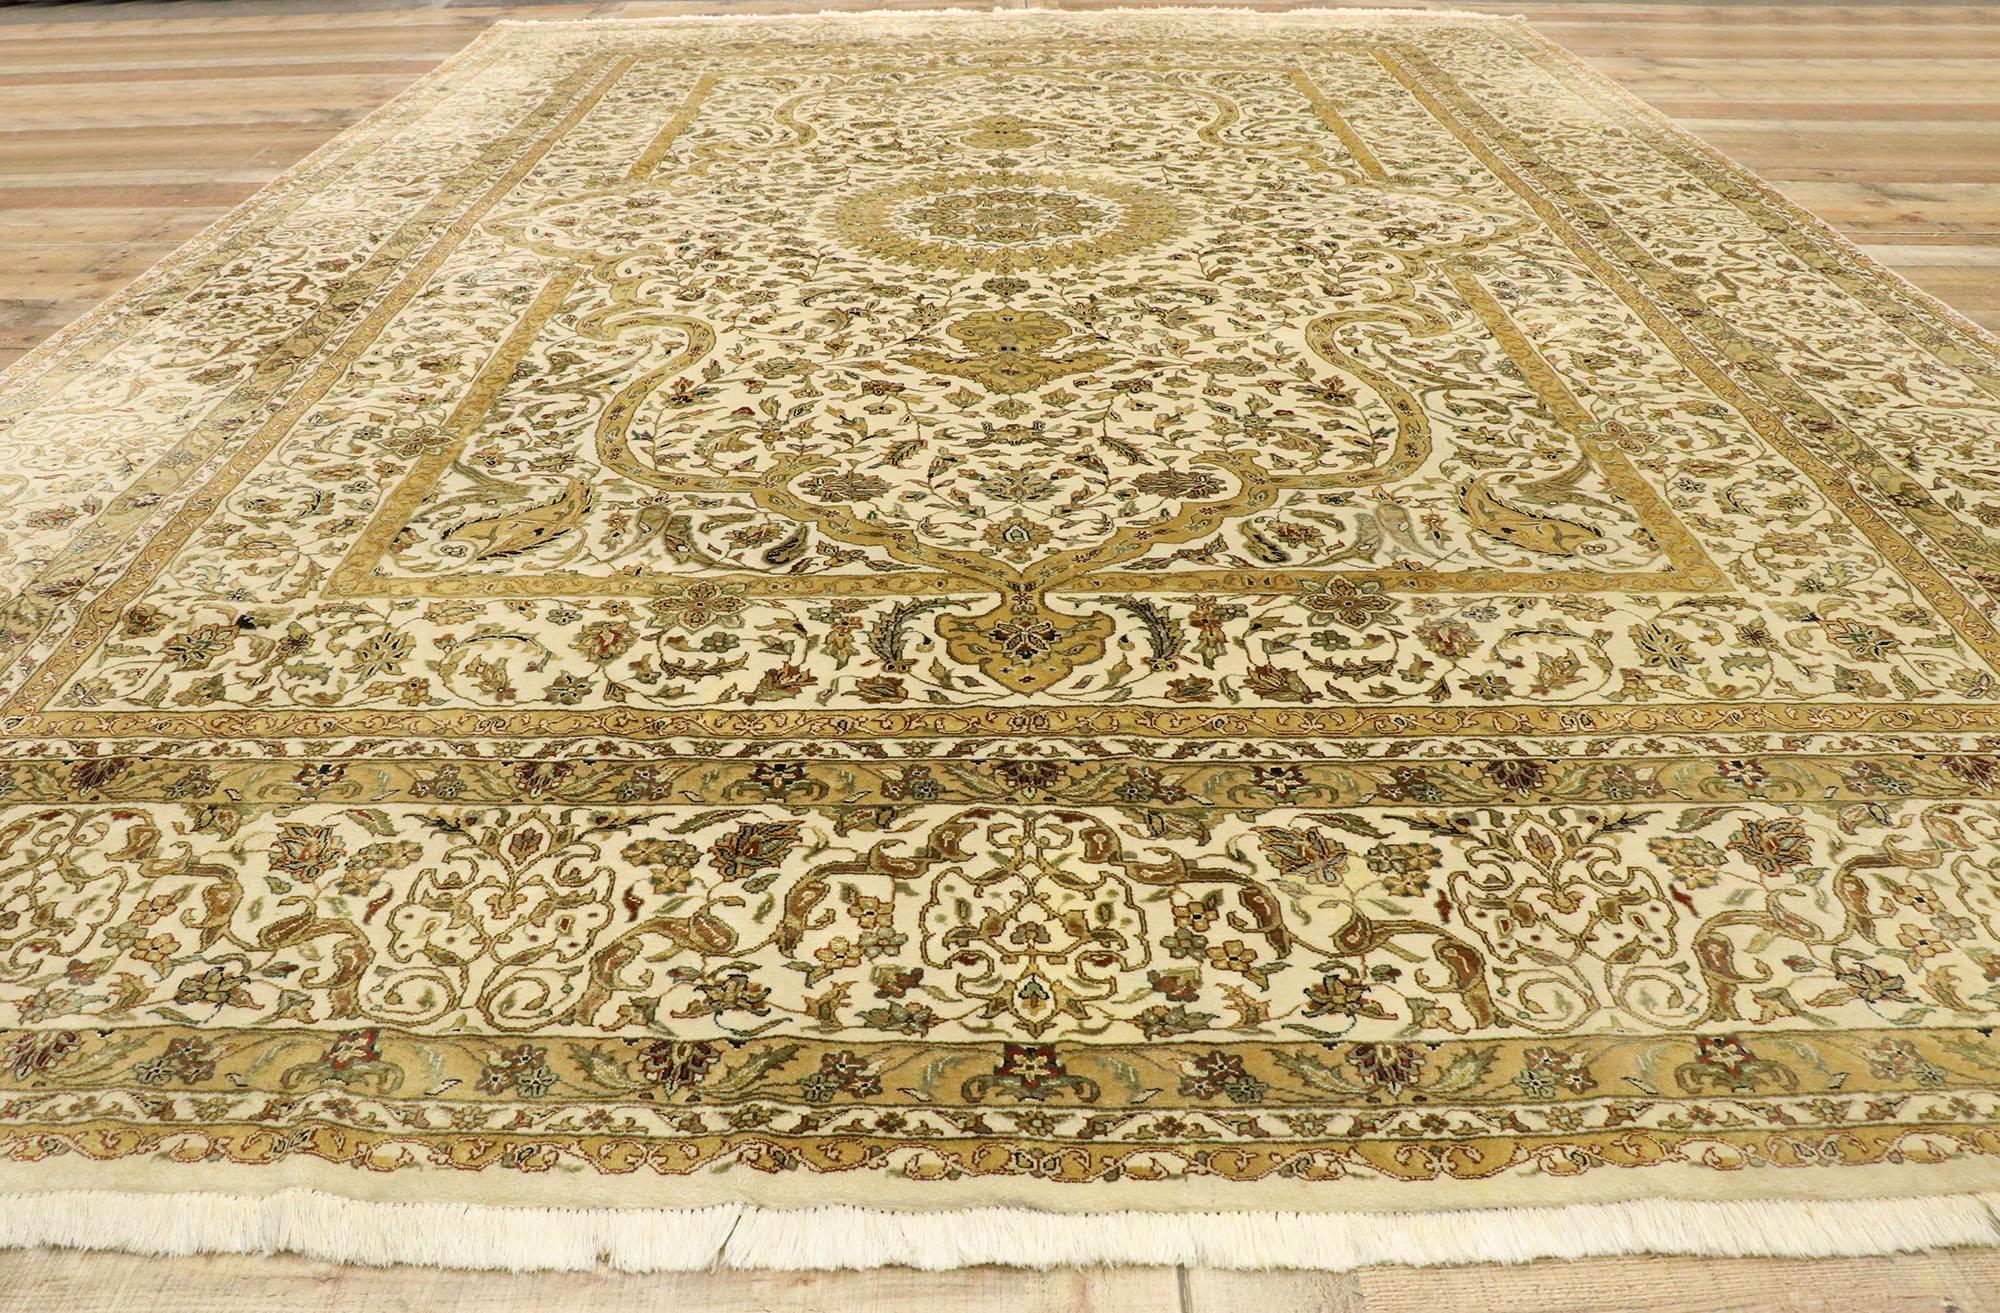 Vintage Indian Area Rug with French Neoclassical Renaissance Style 1